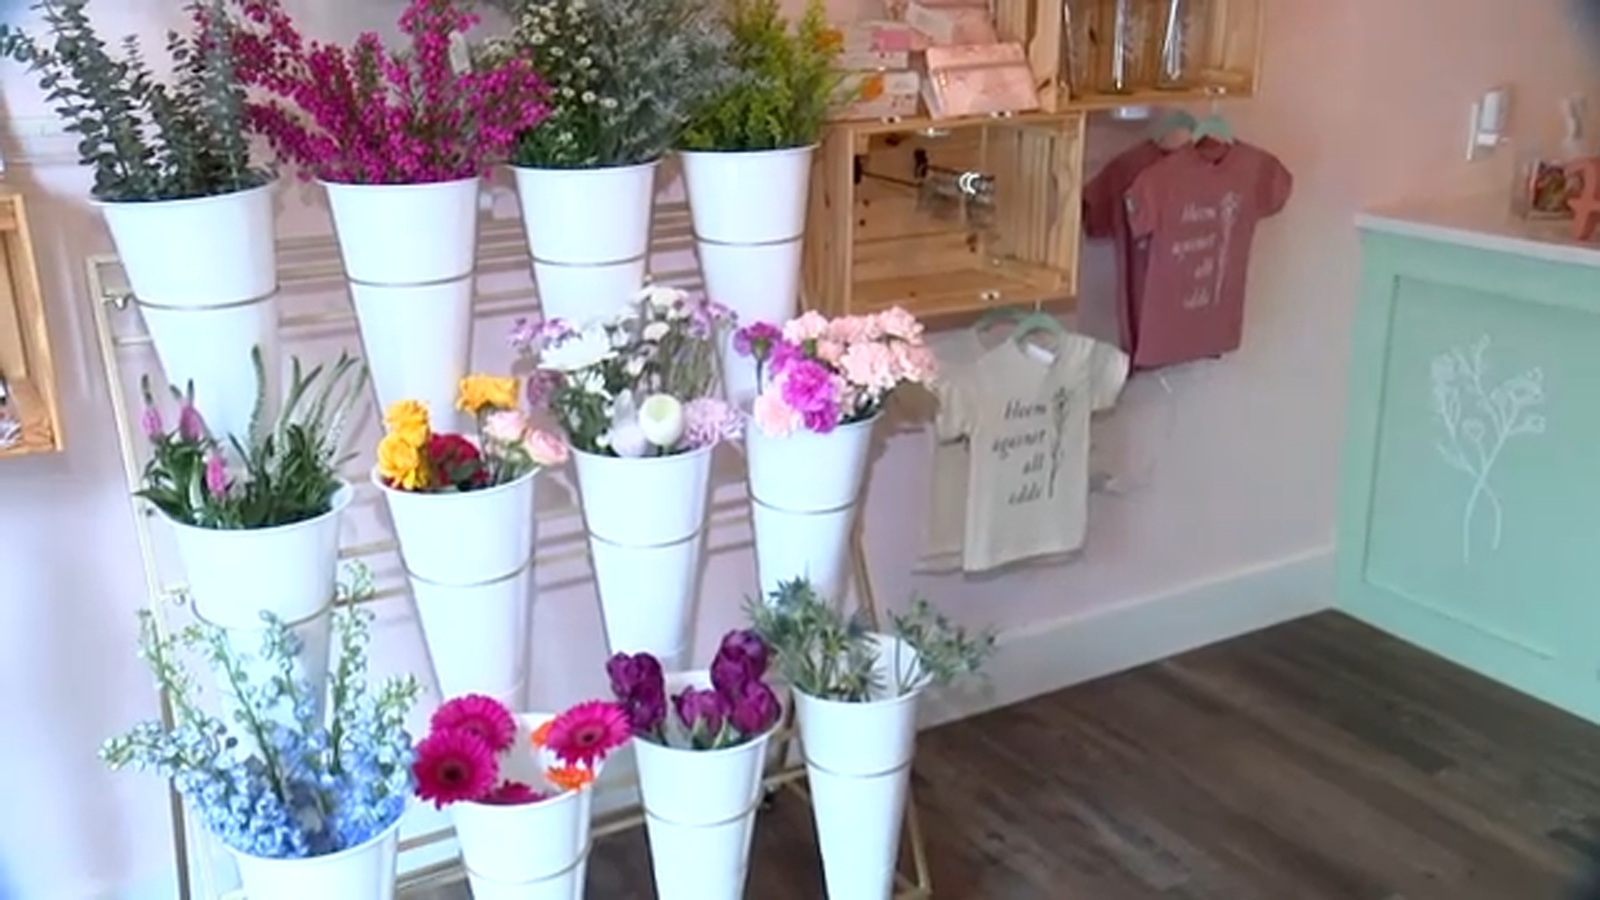 Best bets for deals this Mother’s Day [Video]